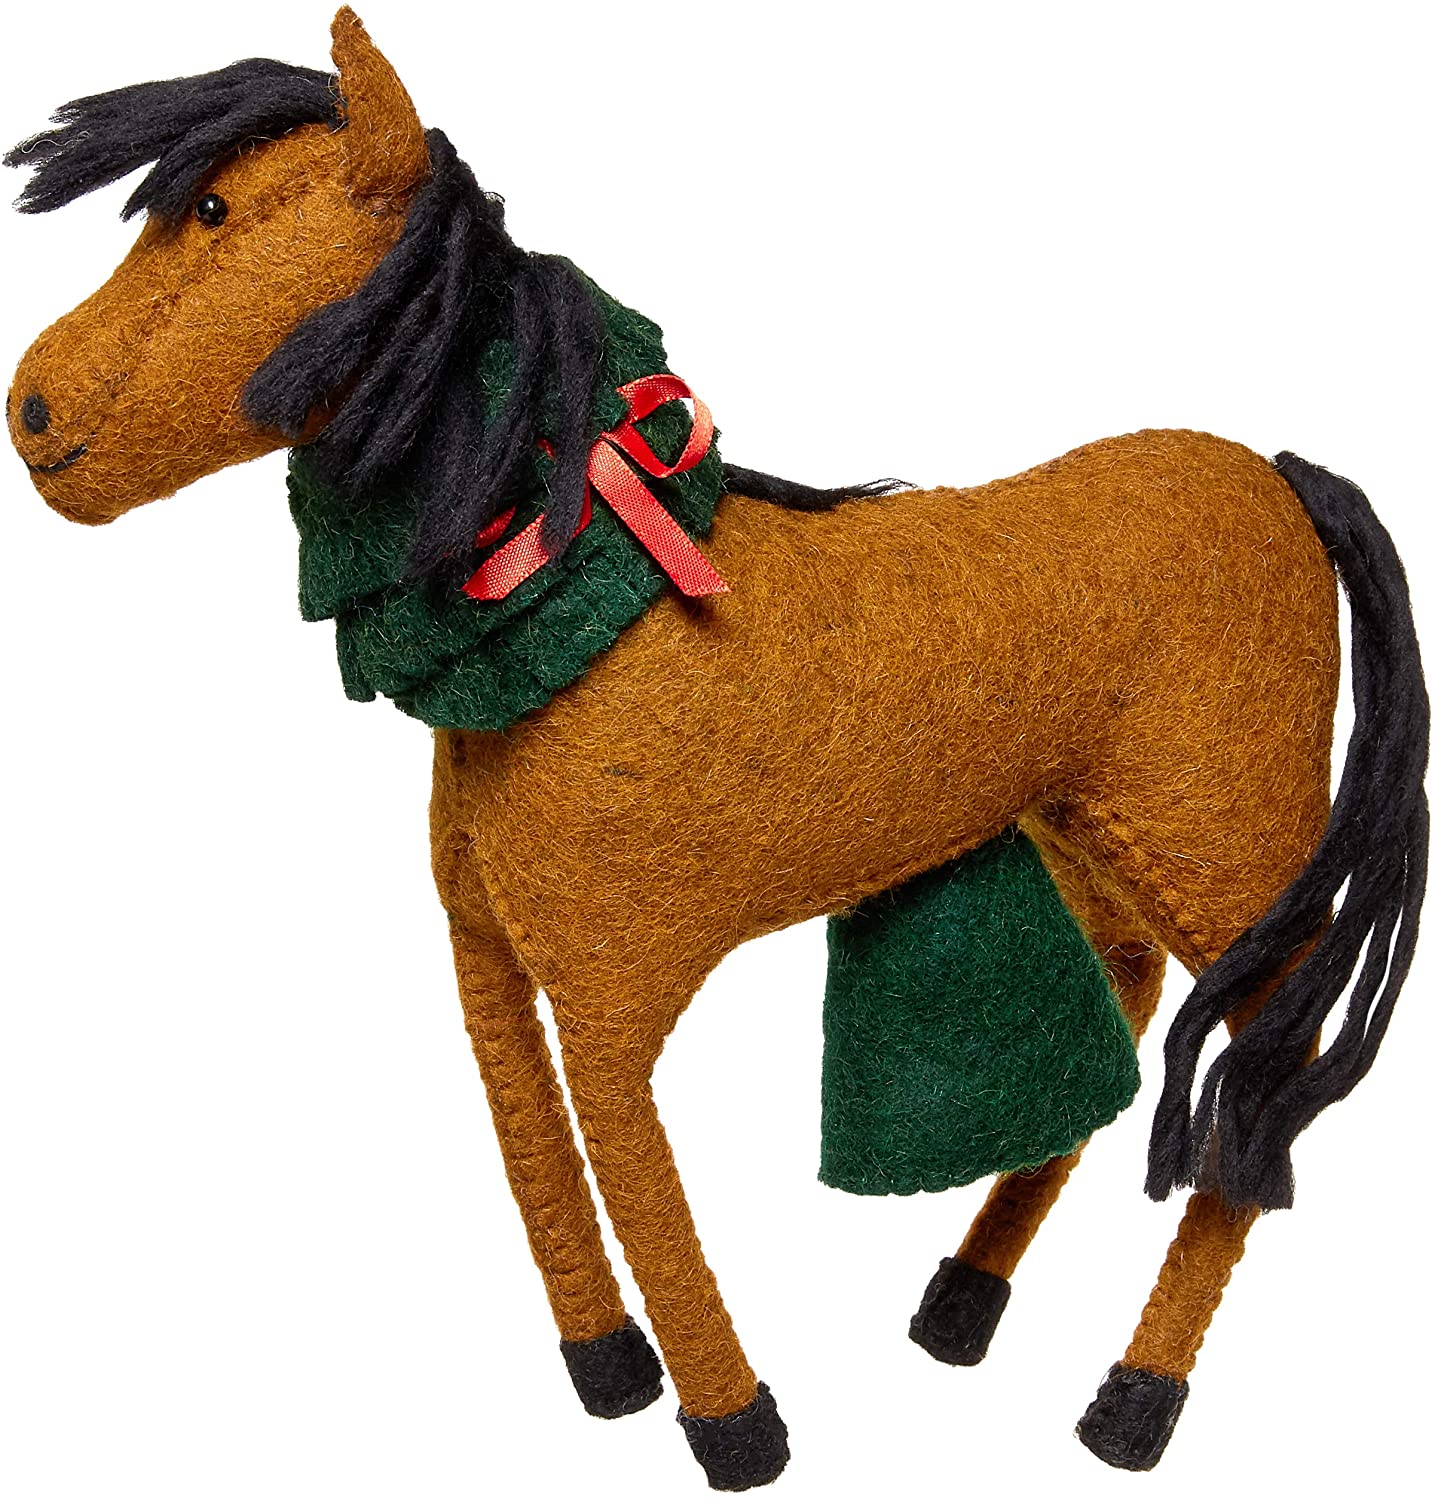 Handmade Hand Felted Wool Christmas Tree Topper - Horse With Wreath